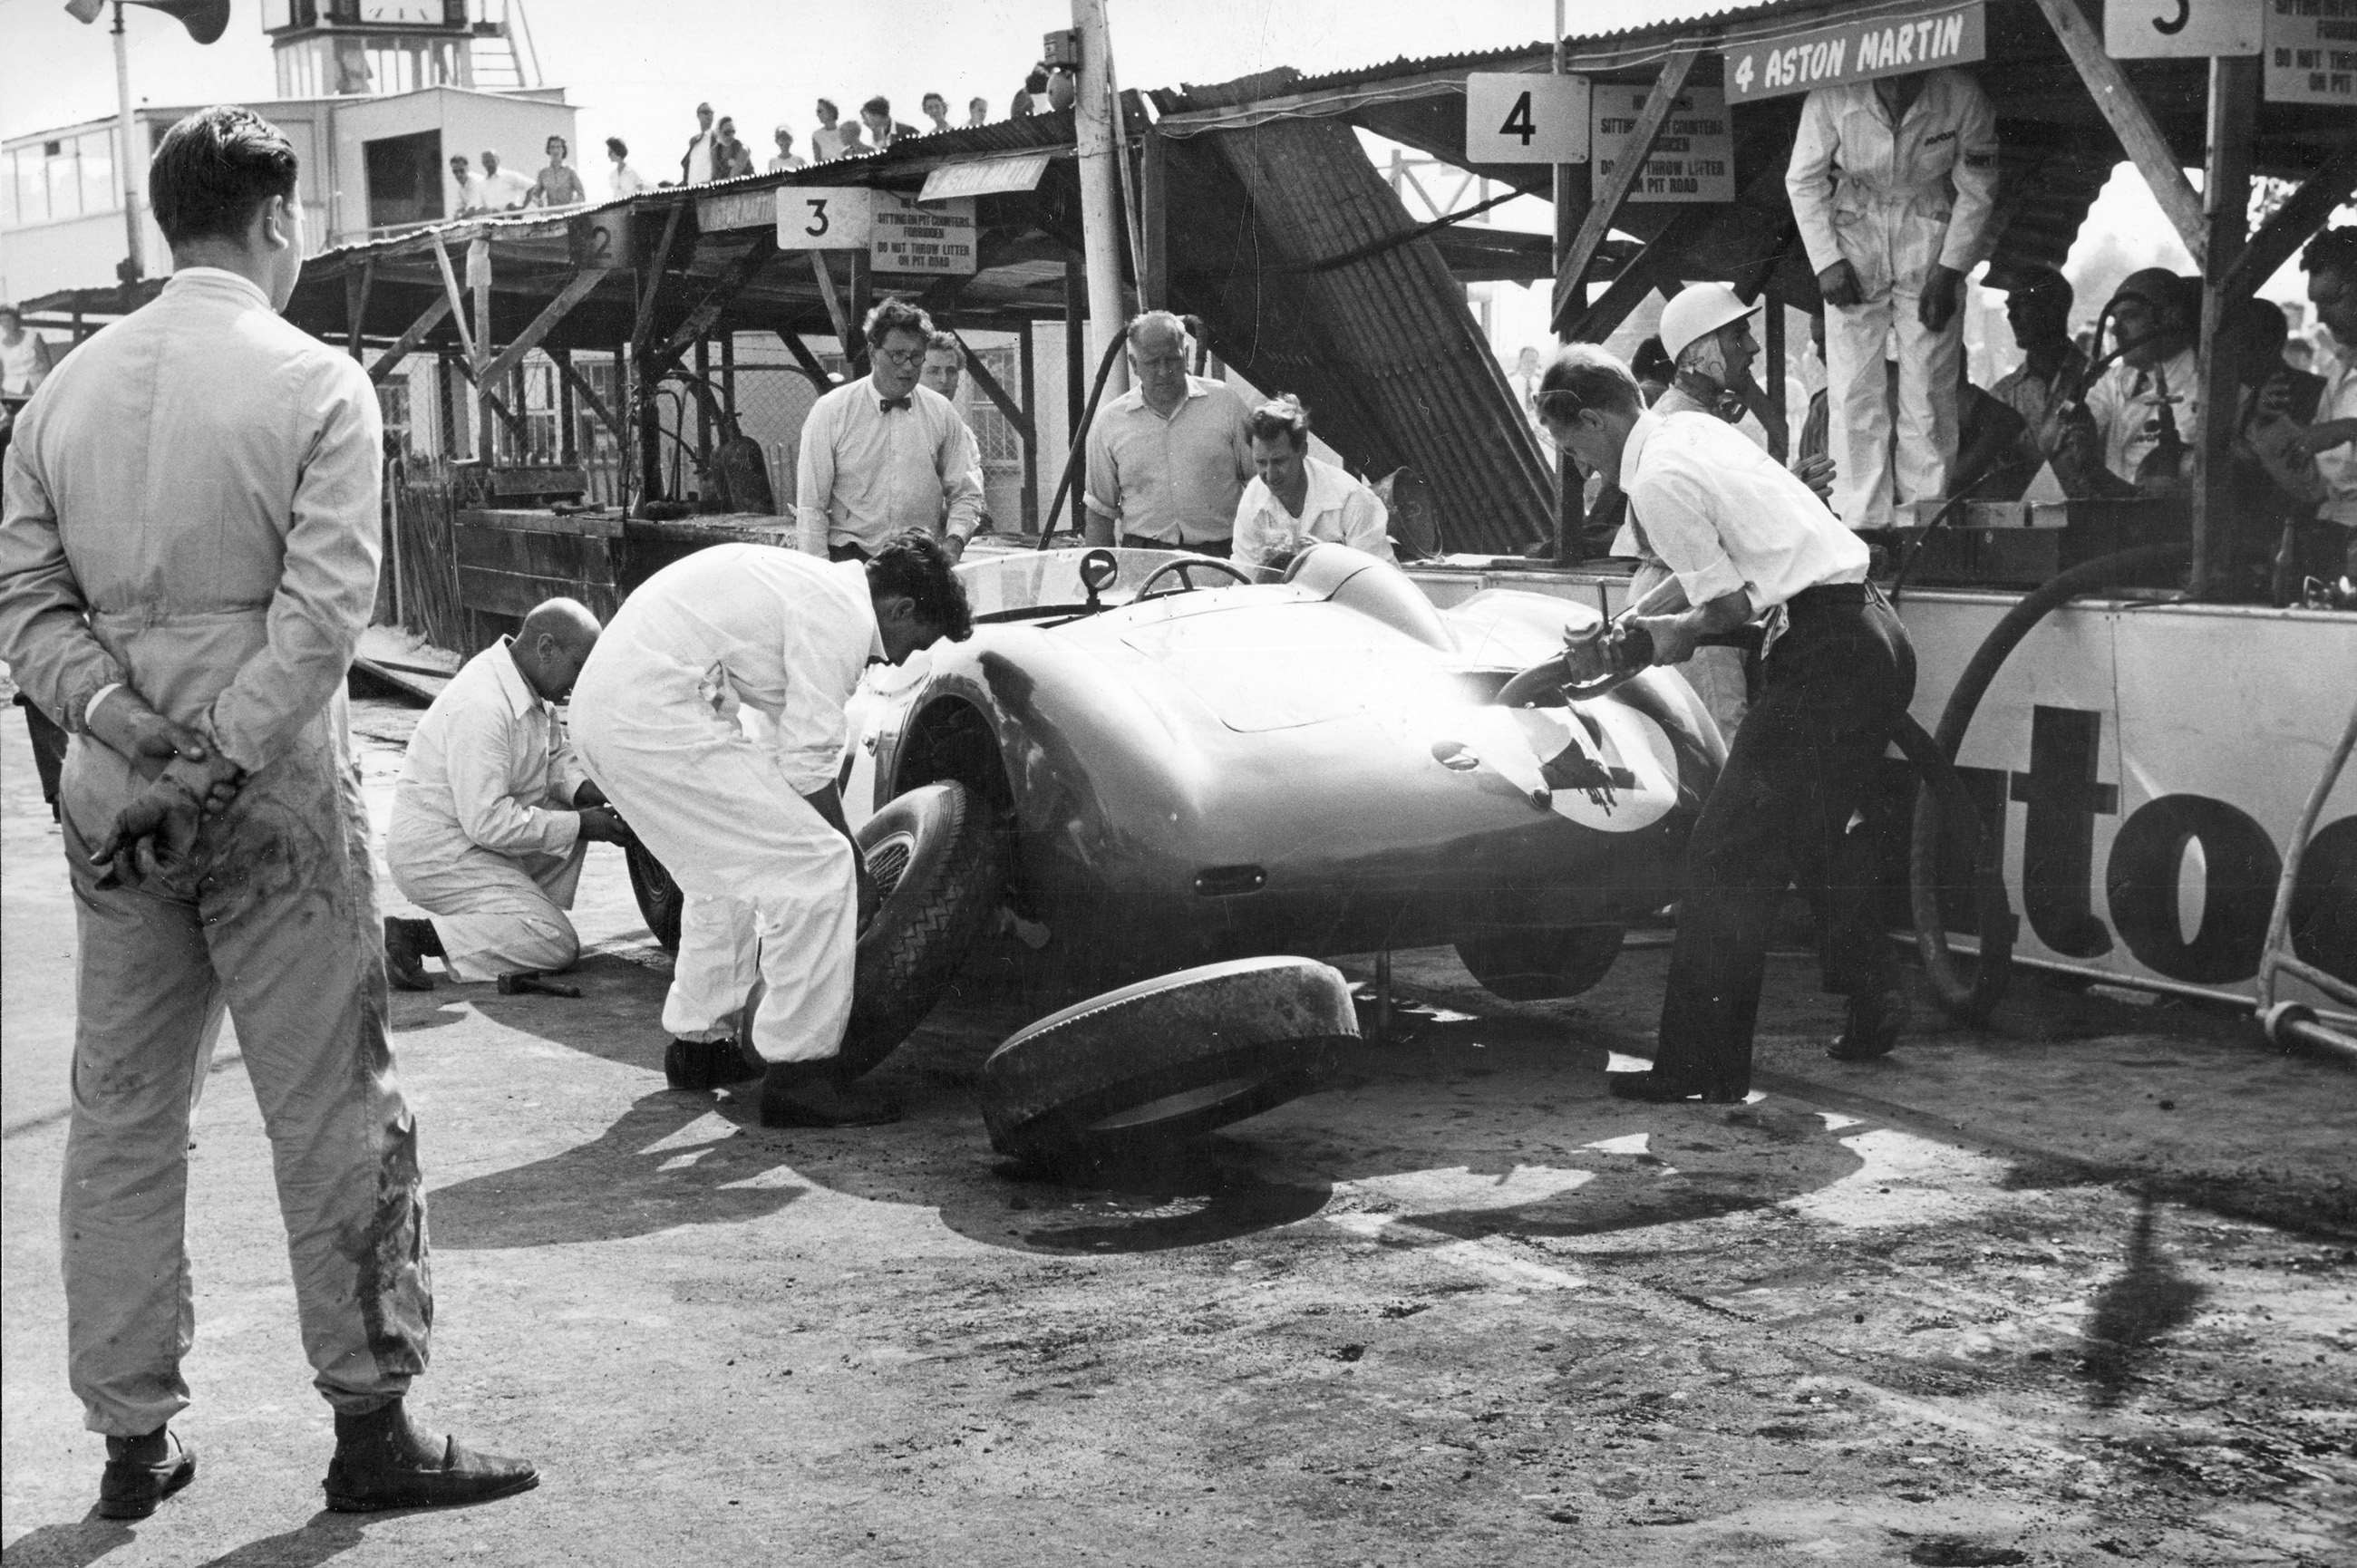 The Shelby/Fairman car which Stirling Moss took over after his own No. 1 car had been burned is seen here at its final refuelling stop - with the fire-ravaged pits self-evident - the contentious refuelling hose and its stop-cock handle can be seen clearly here.